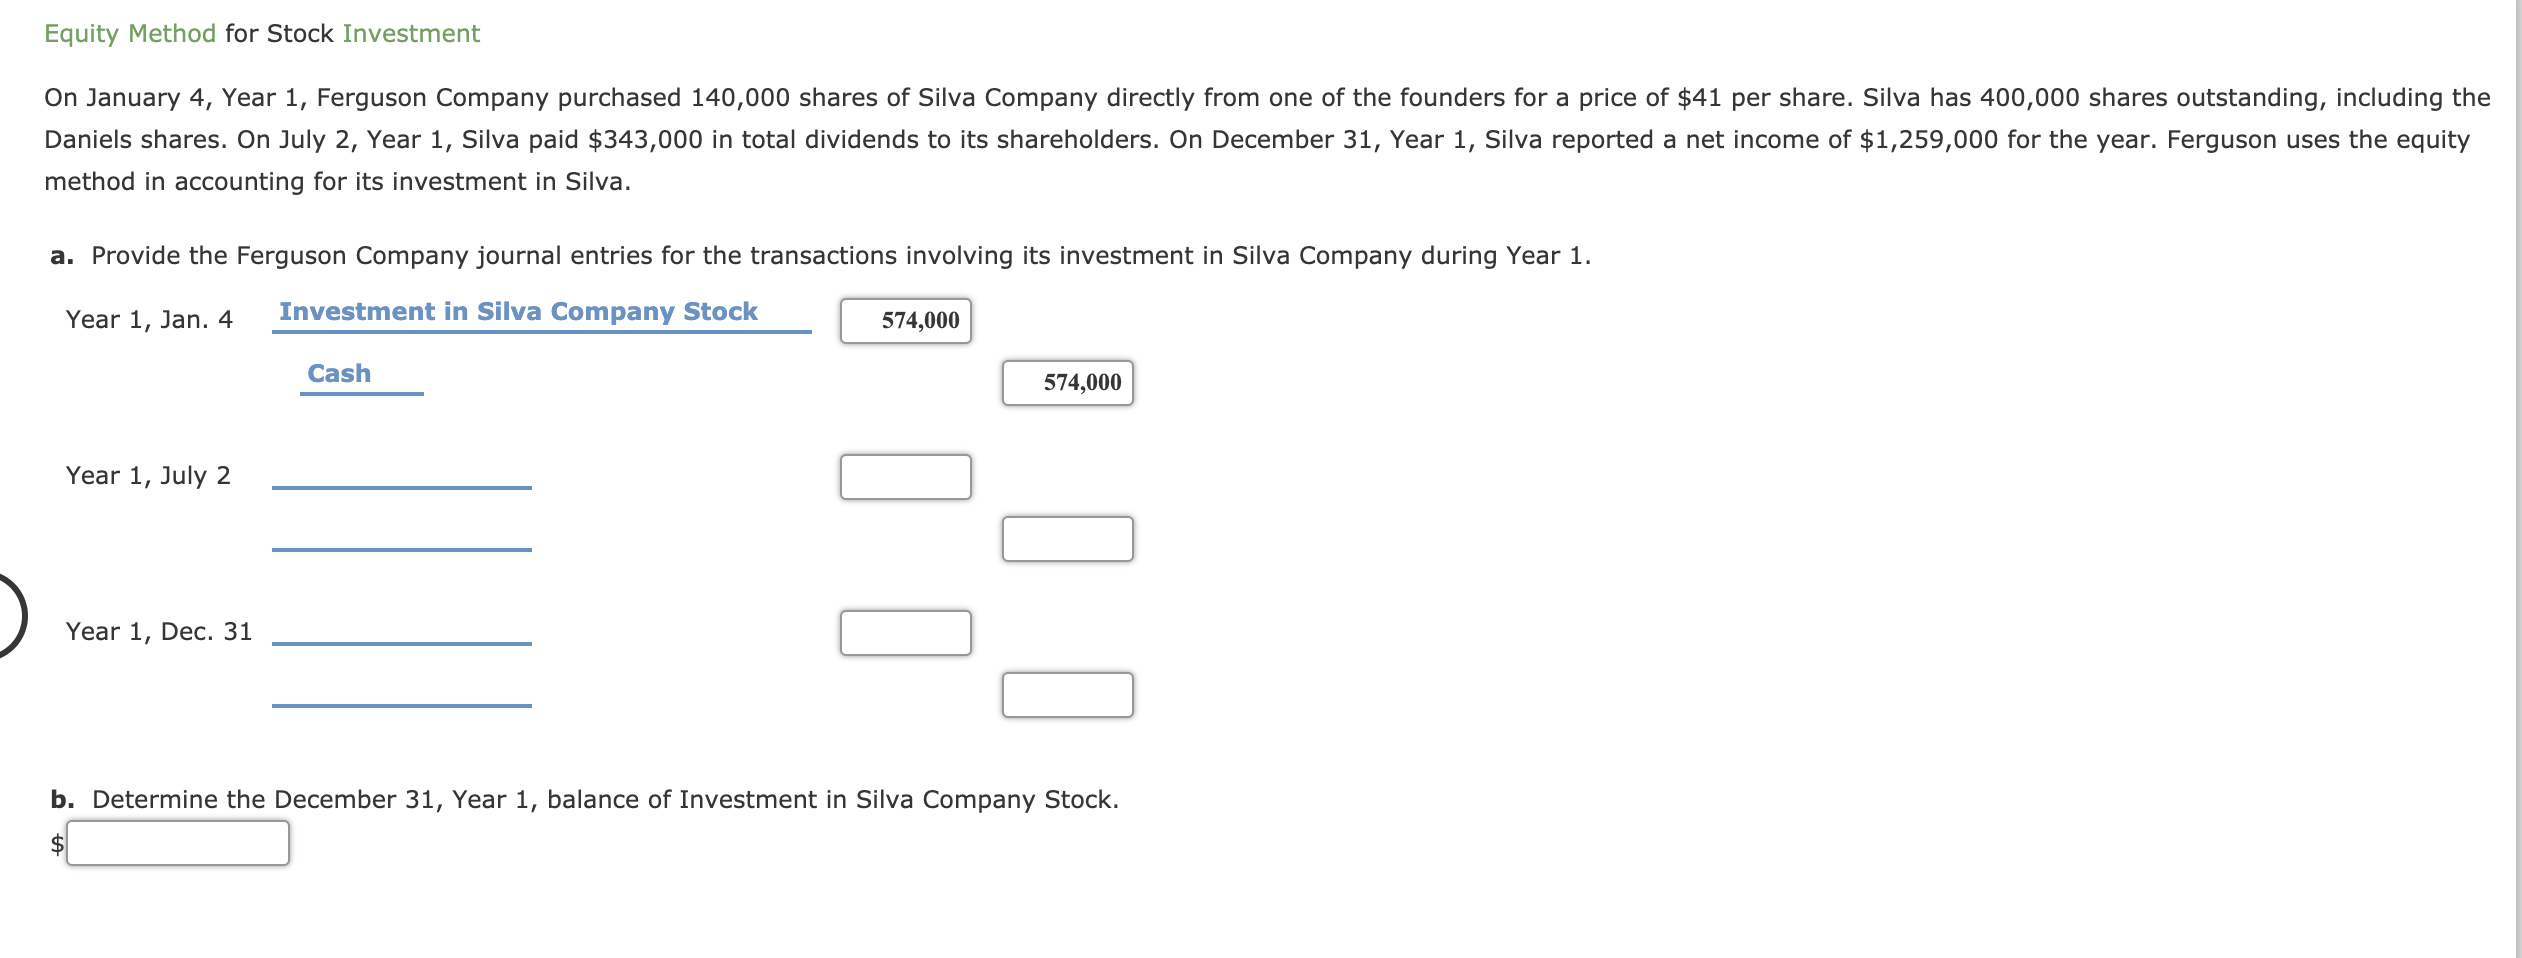 Equity Method for Stock Investment
On January 4, Year 1, Ferguson Company purchased 140,000 shares of Silva Company directly from one of the founders for a price of $41 per share. Silva has 400,000 shares outstanding, including the
Daniels shares. On July 2, Year 1, Silva paid $343,000 in total dividends to its shareholders. On December 31, Year 1, Silva reported a net income of $1,259,000 for the year. Ferguson uses the equity
method in accounting for its investment in Silva.
a. Provide the Ferguson Company journal entries for the transactions involving its investment in Silva Company during Year 1.
Year 1, Jan. 4
Investment in Silva Company Stock
574,000
Cash
574,000
Year 1, July 2
Year 1, Dec. 31
b. Determine the December 31, Year 1, balance of Investment in Silva Company Stock.
$
